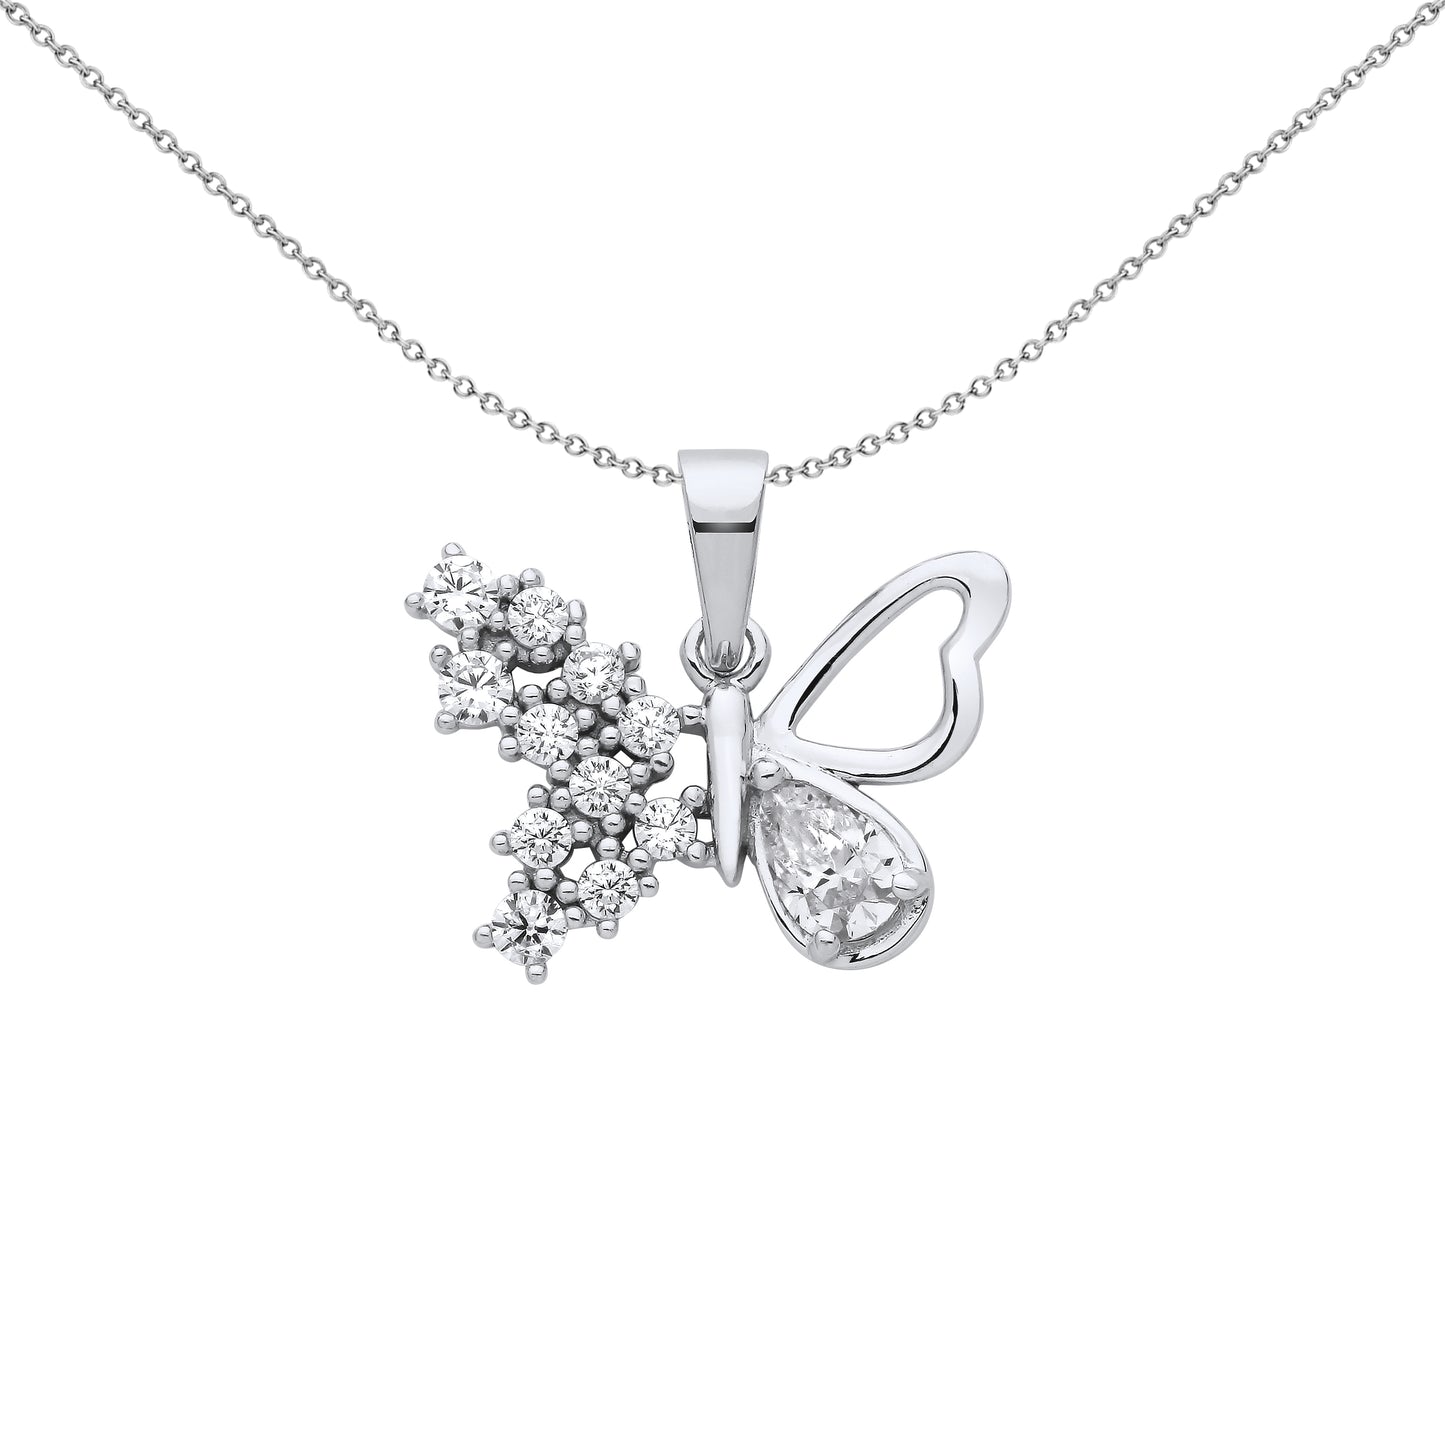 Silver  Frosted Butterfly Pendant Necklace - GVP669